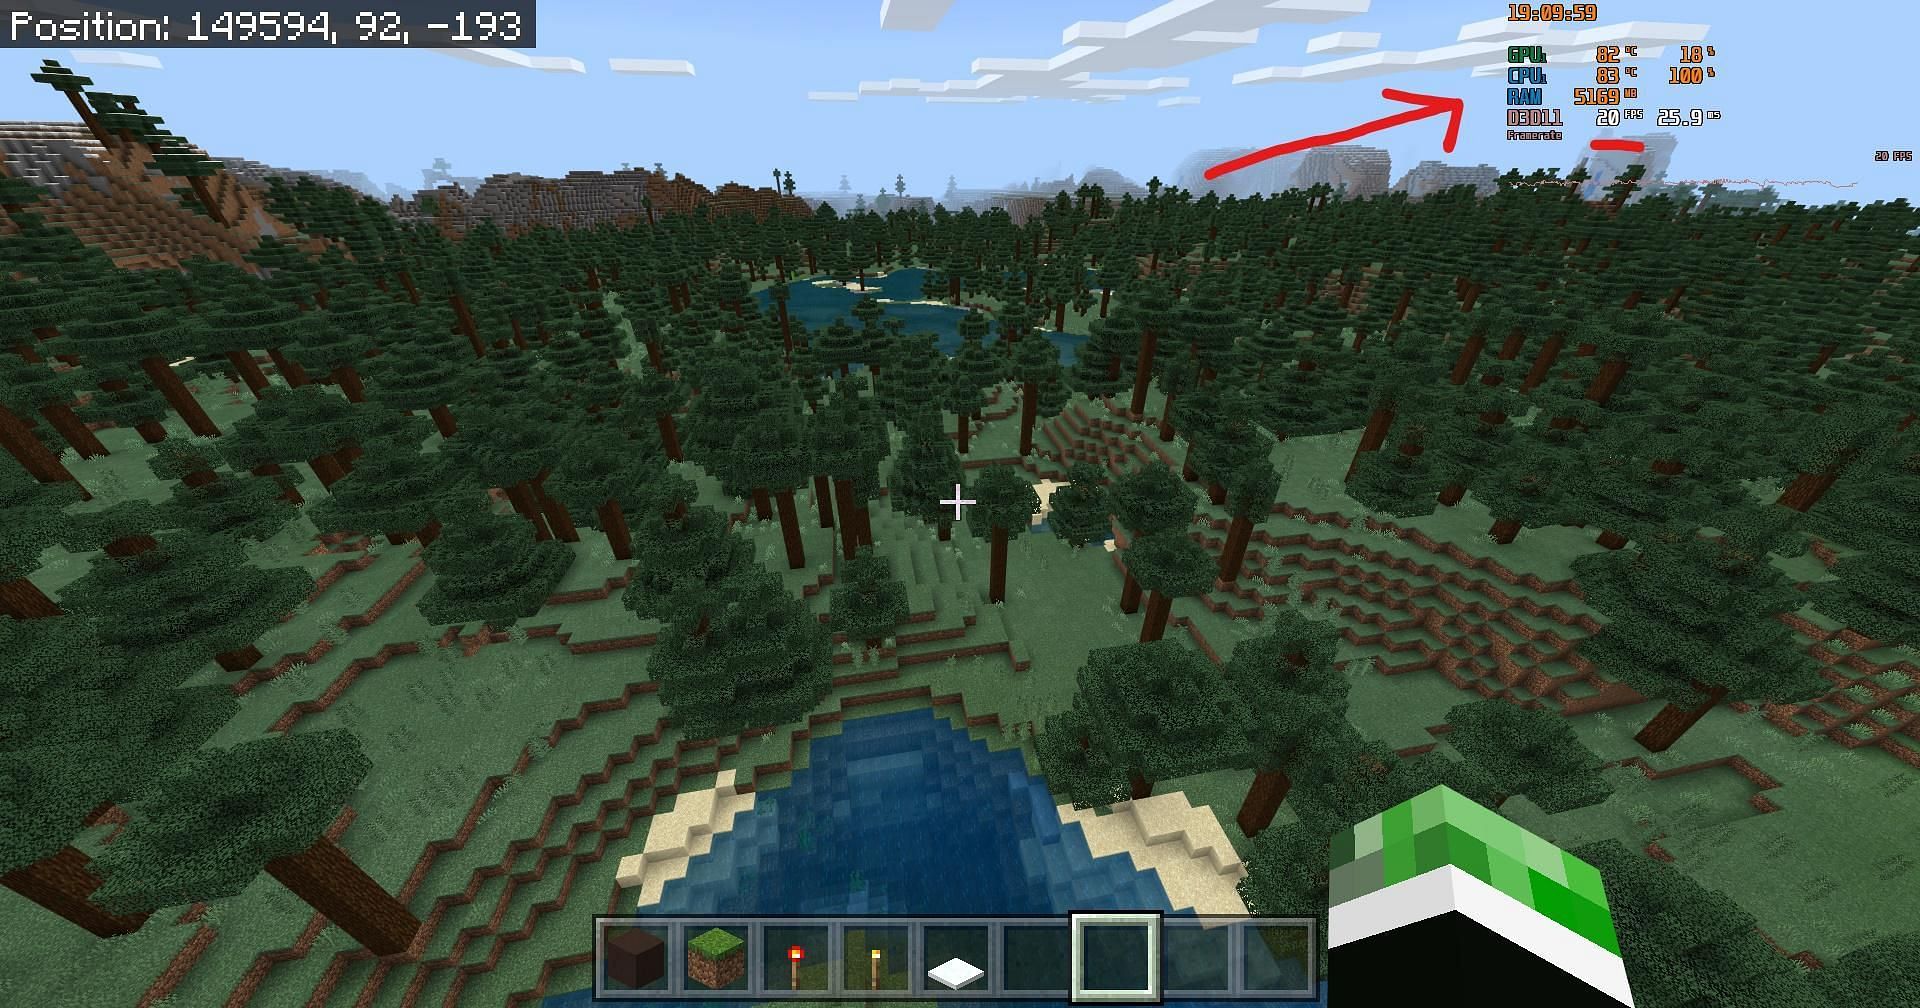 A player experiences FPS drop when rendering a biome from the top-down (Image via Mojang/Reddit user XBGamerX).